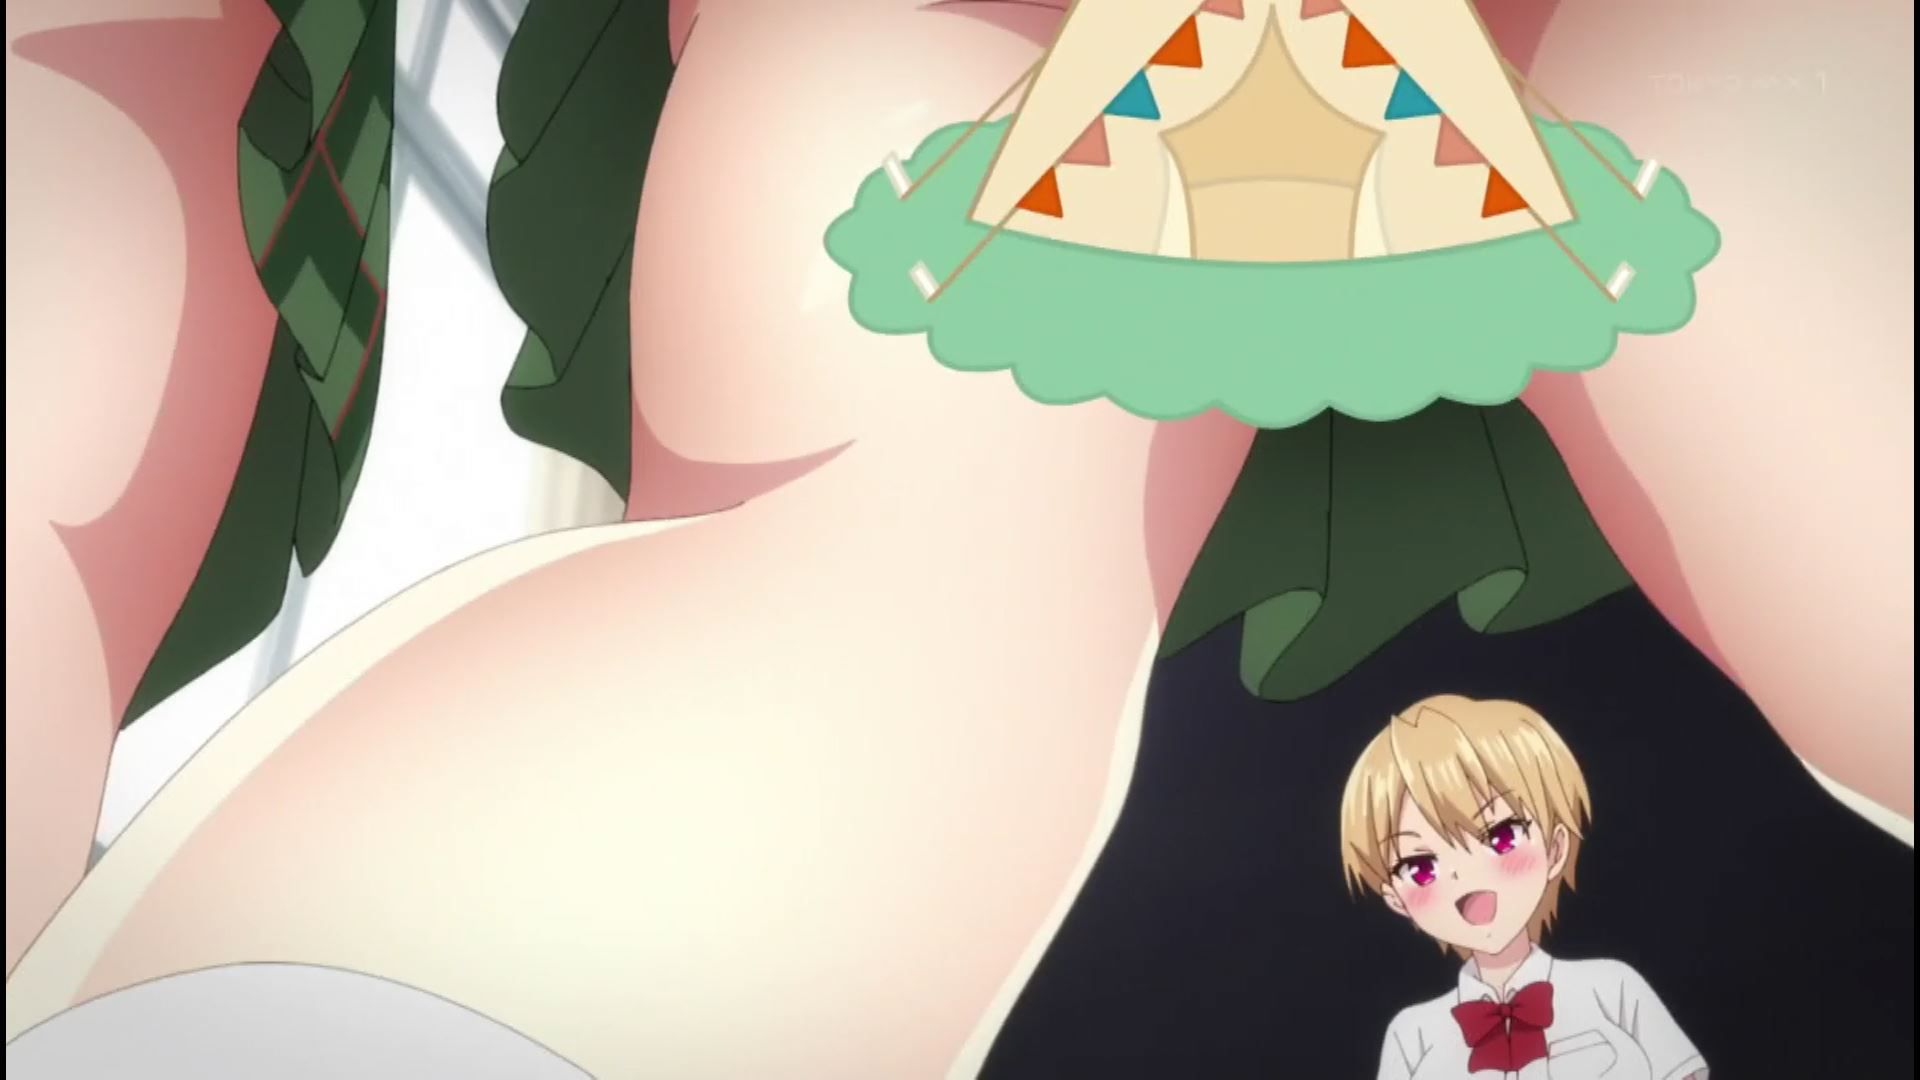 In episode 4 of the anime "Harem Kyampu!", the scene where you have sex with a girl in a tent normally! 2